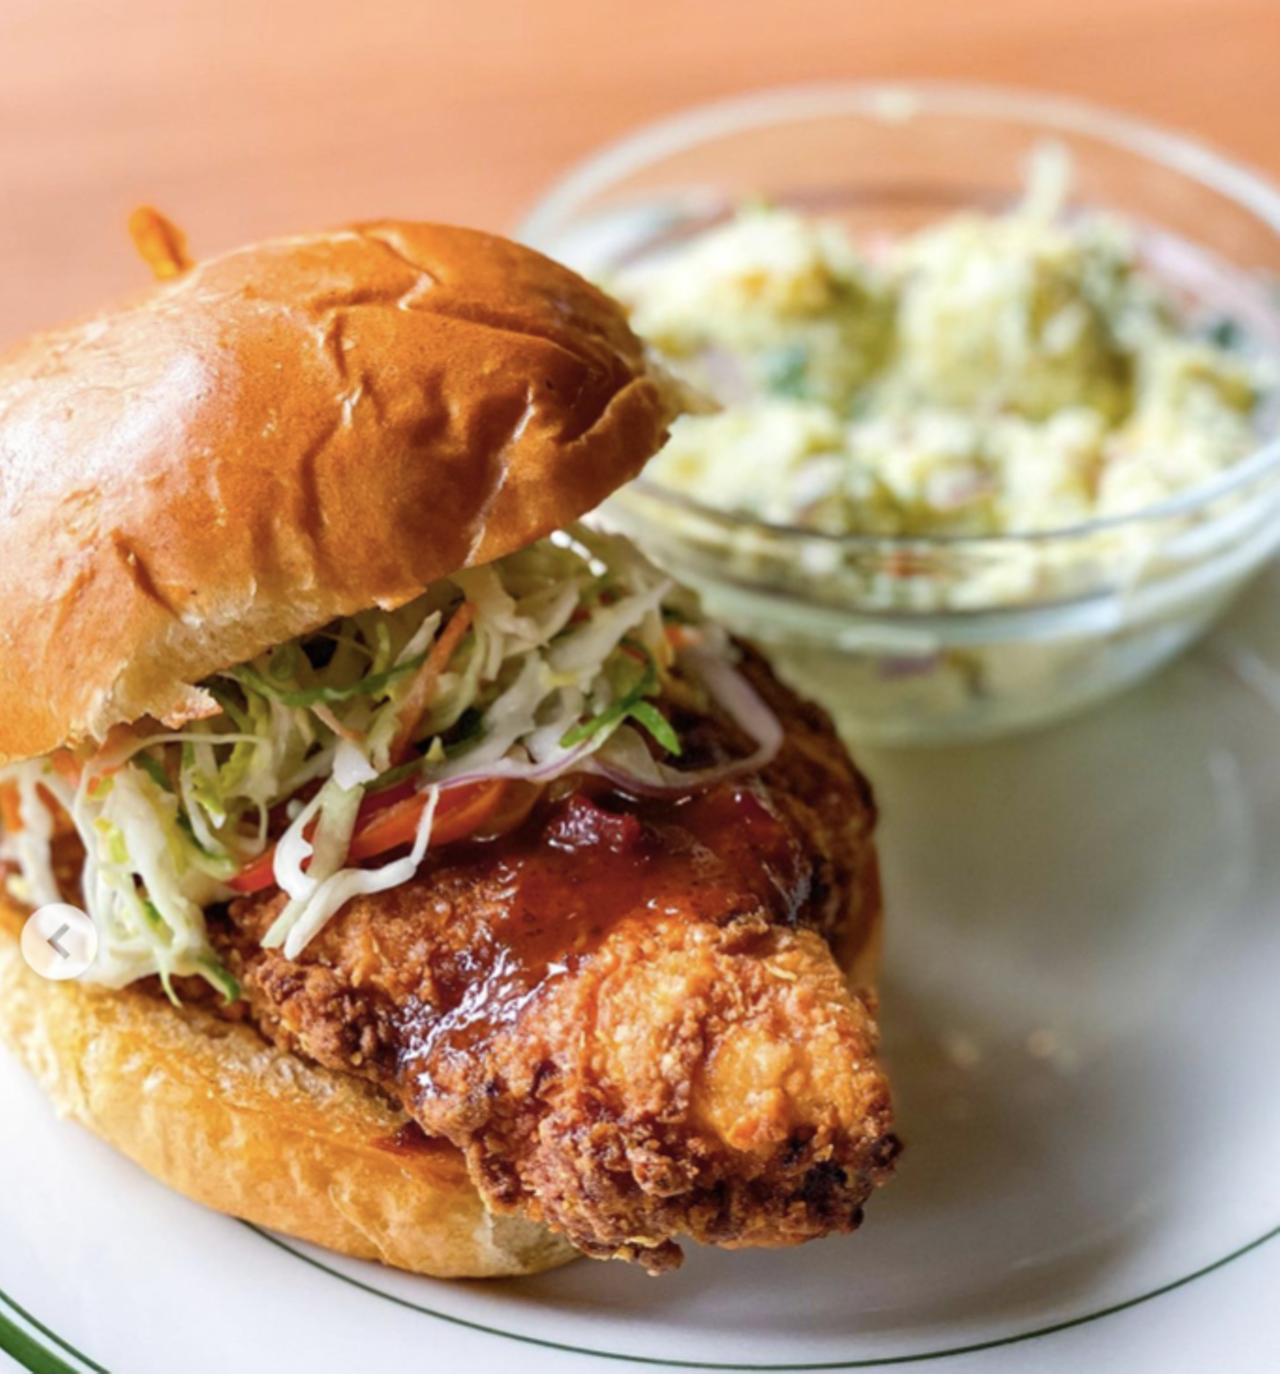 The Hayden
4025 Broadway, (210) 437-4306,  thehaydensa.com
The Hayden offers a matzah meal crusted, tahini slaw and harissa sauce topped fried chicken sandwich that can easily become “the usual.” You can even get it grilled if you just aren’t feeling fried.  
Photo via Instagram / stine.eats